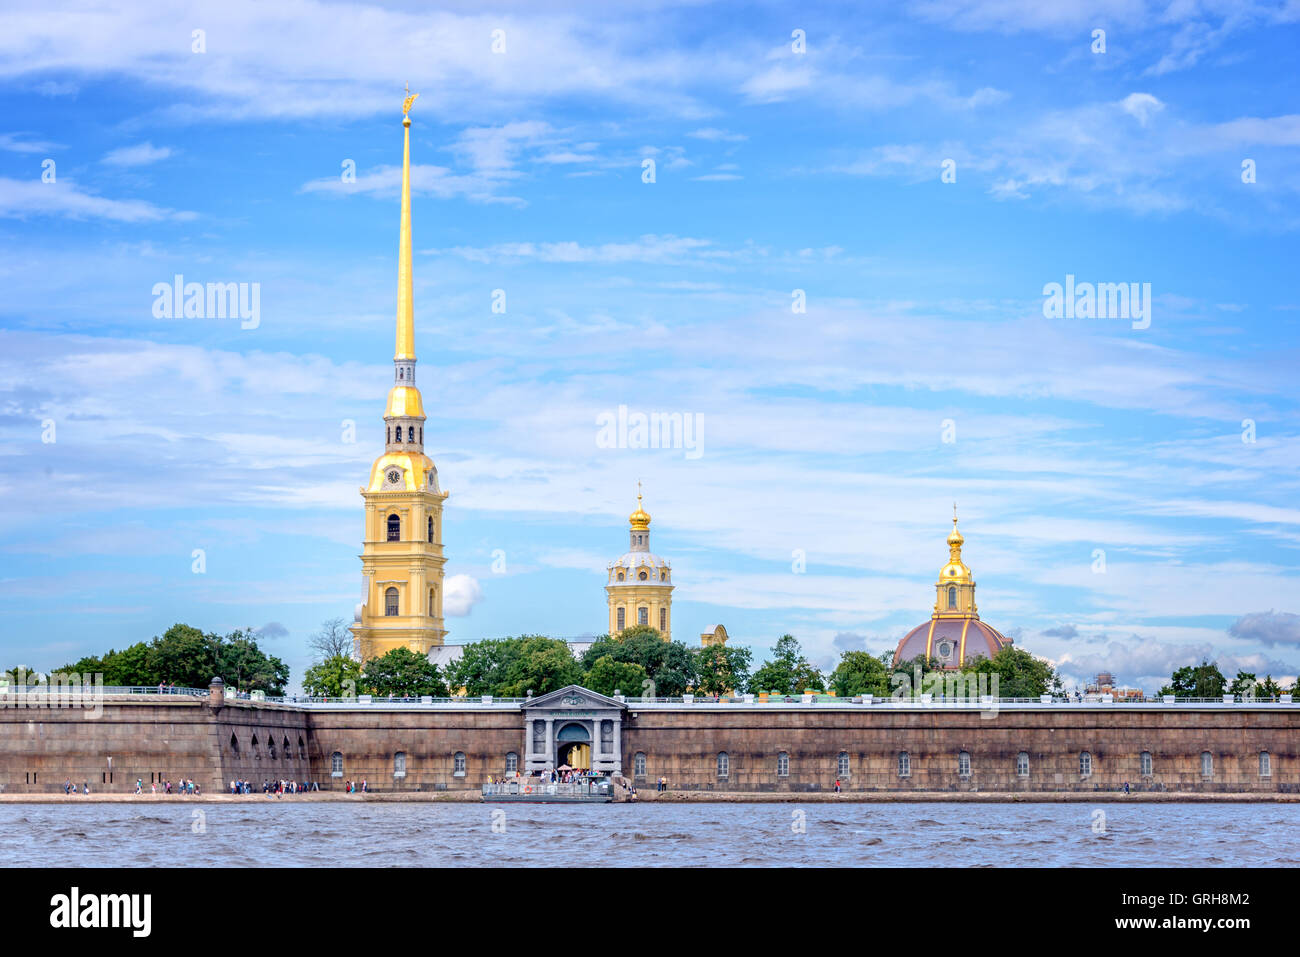 Peter and Paul fortress and the Neva river, St Petersburg Russia Stock Photo